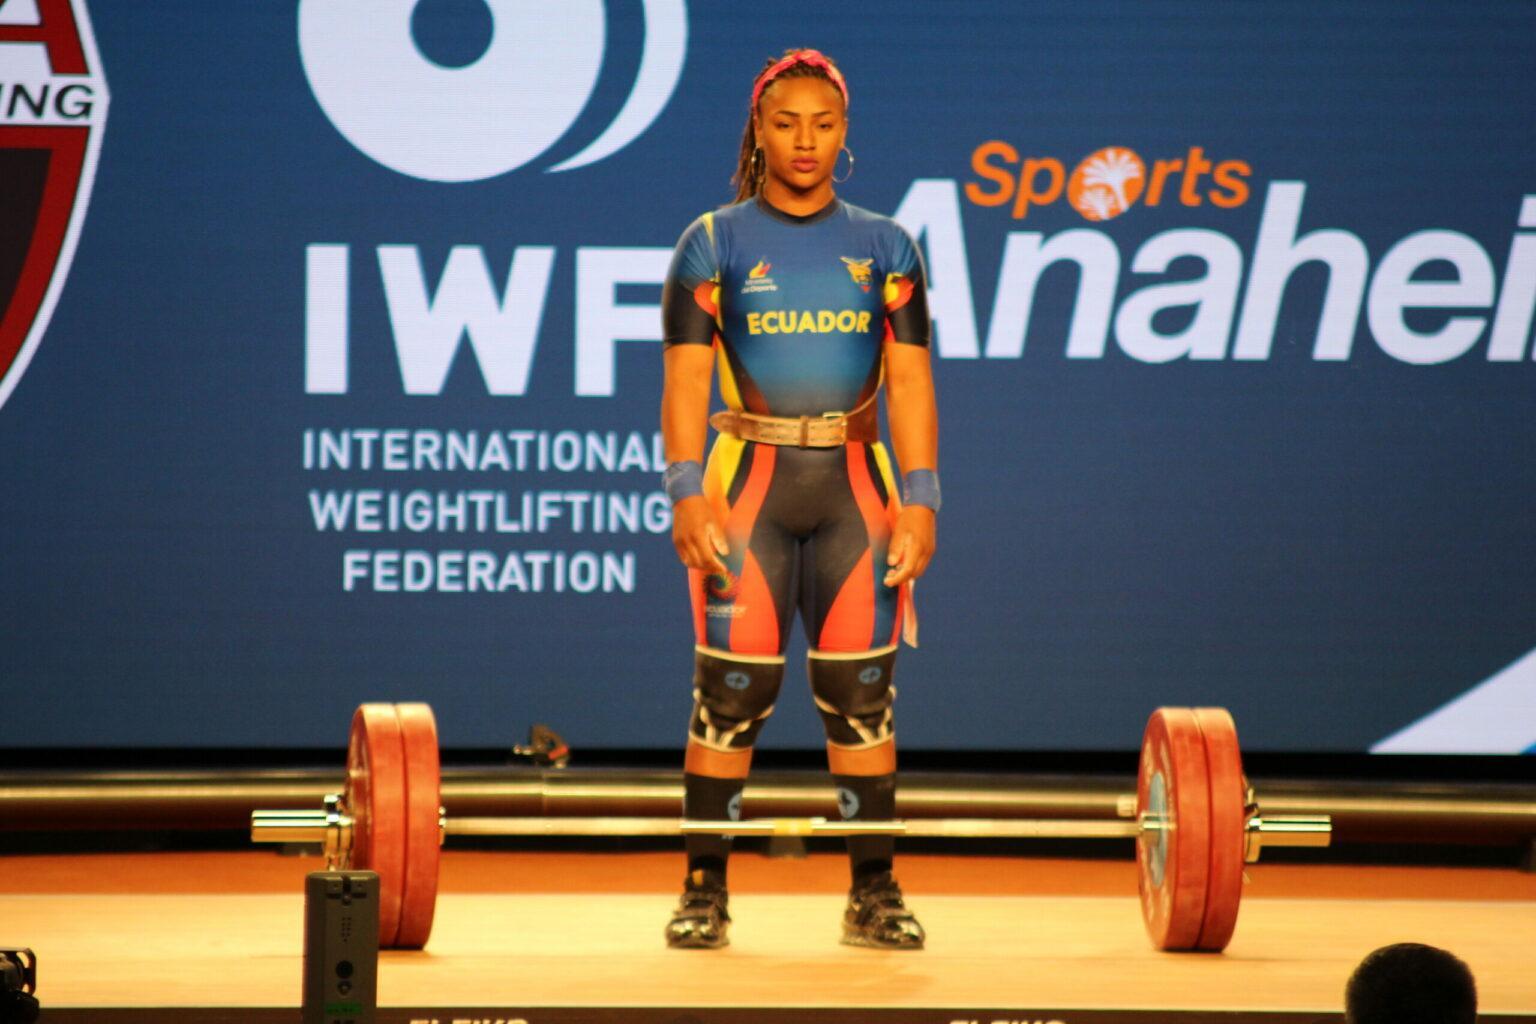 IWF Certified Barbells – Not All Olympic Weightlifting Bars Are Equal